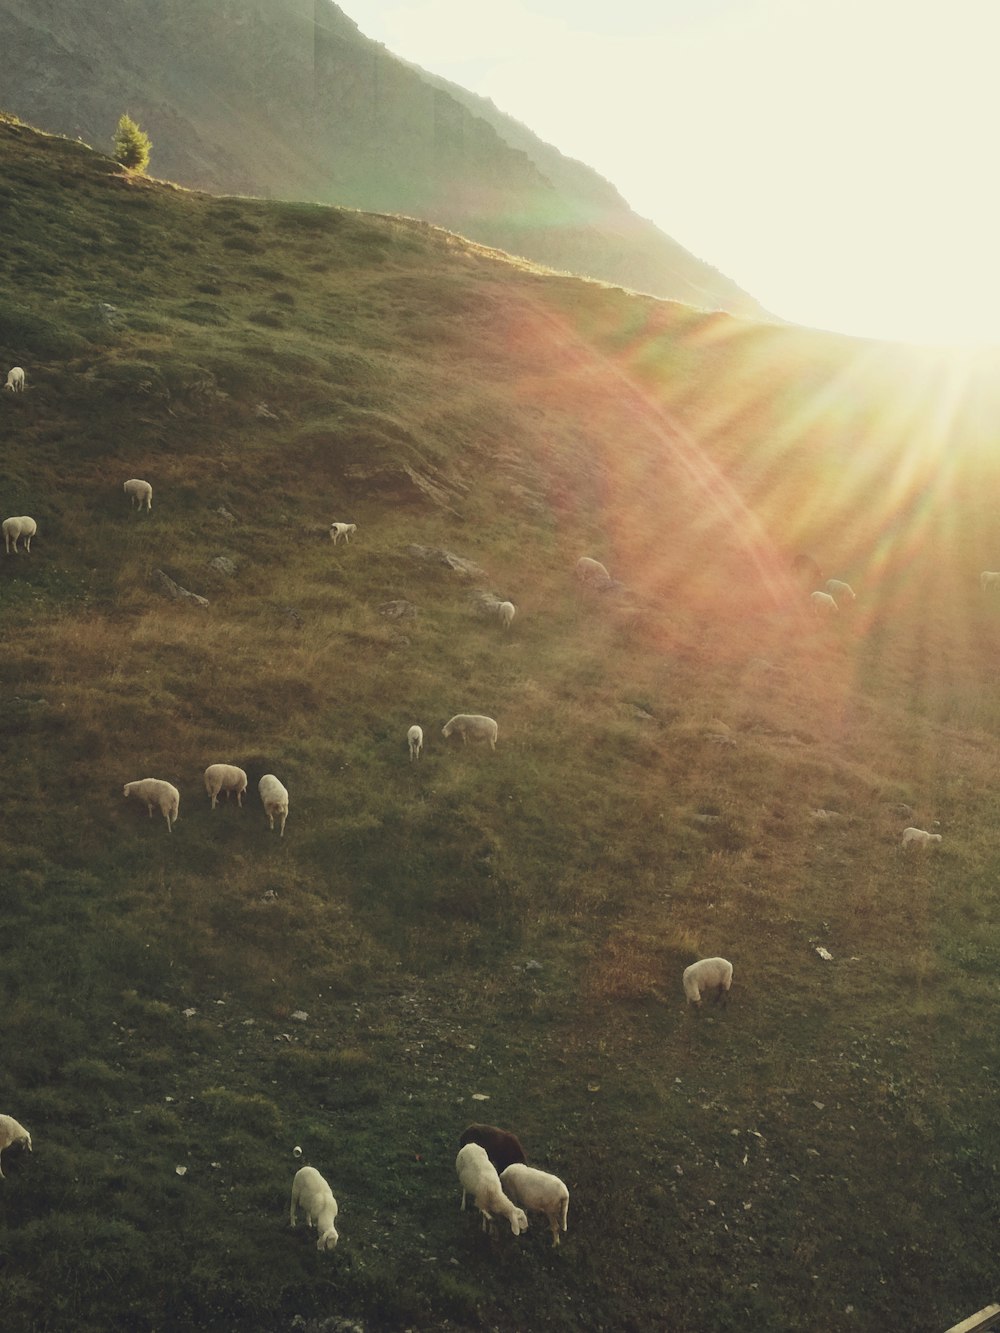 a group of sheep grazing on a hill